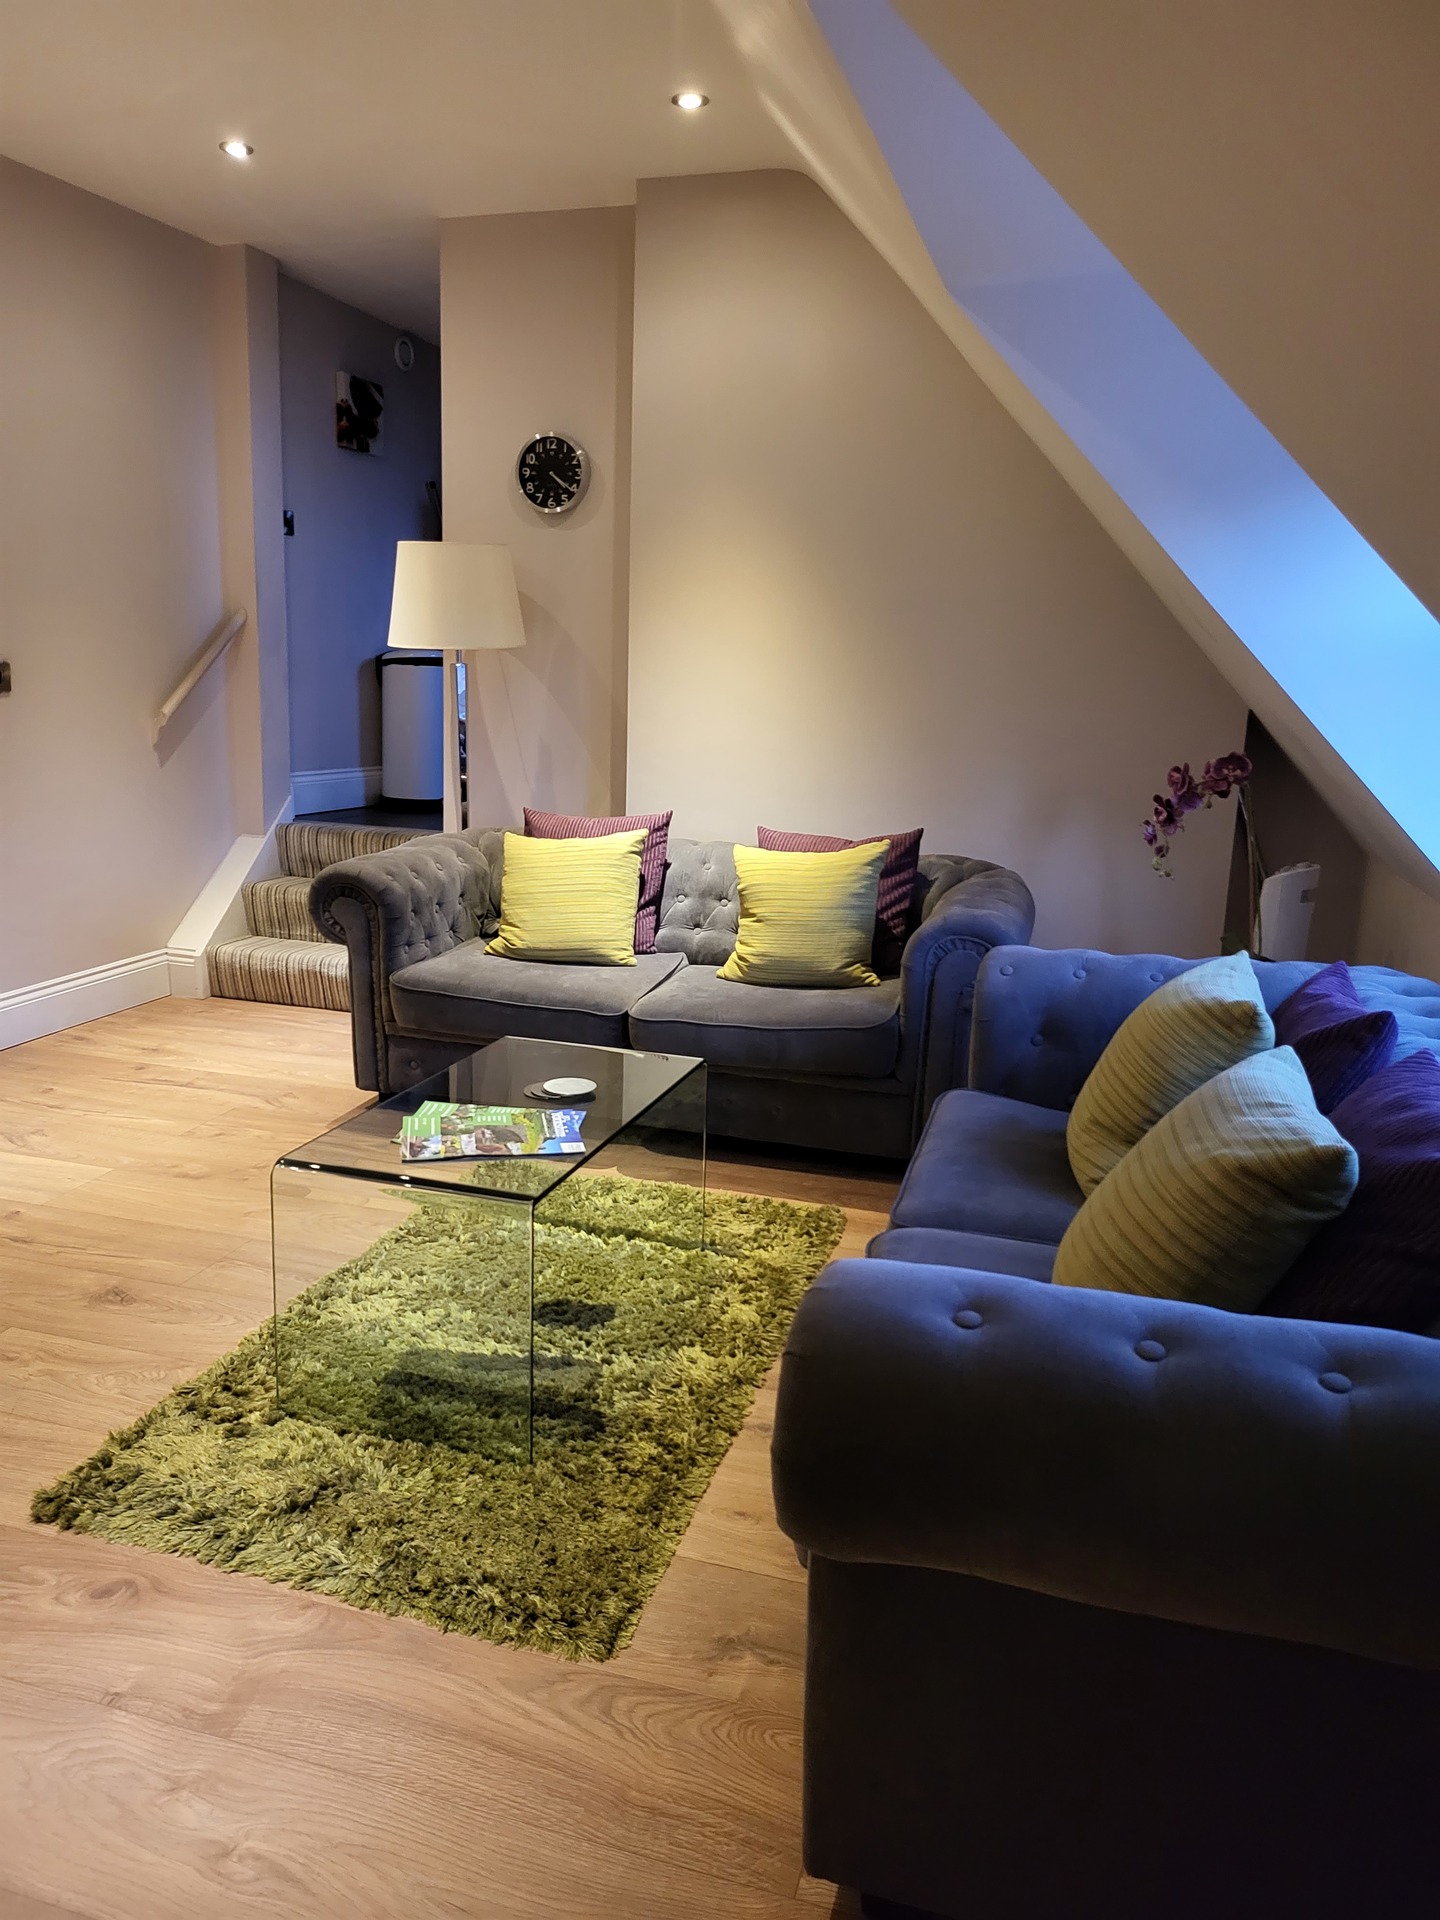 Harrogate Lifestyle Luxury Serviced Apartments stand as a trusted choice